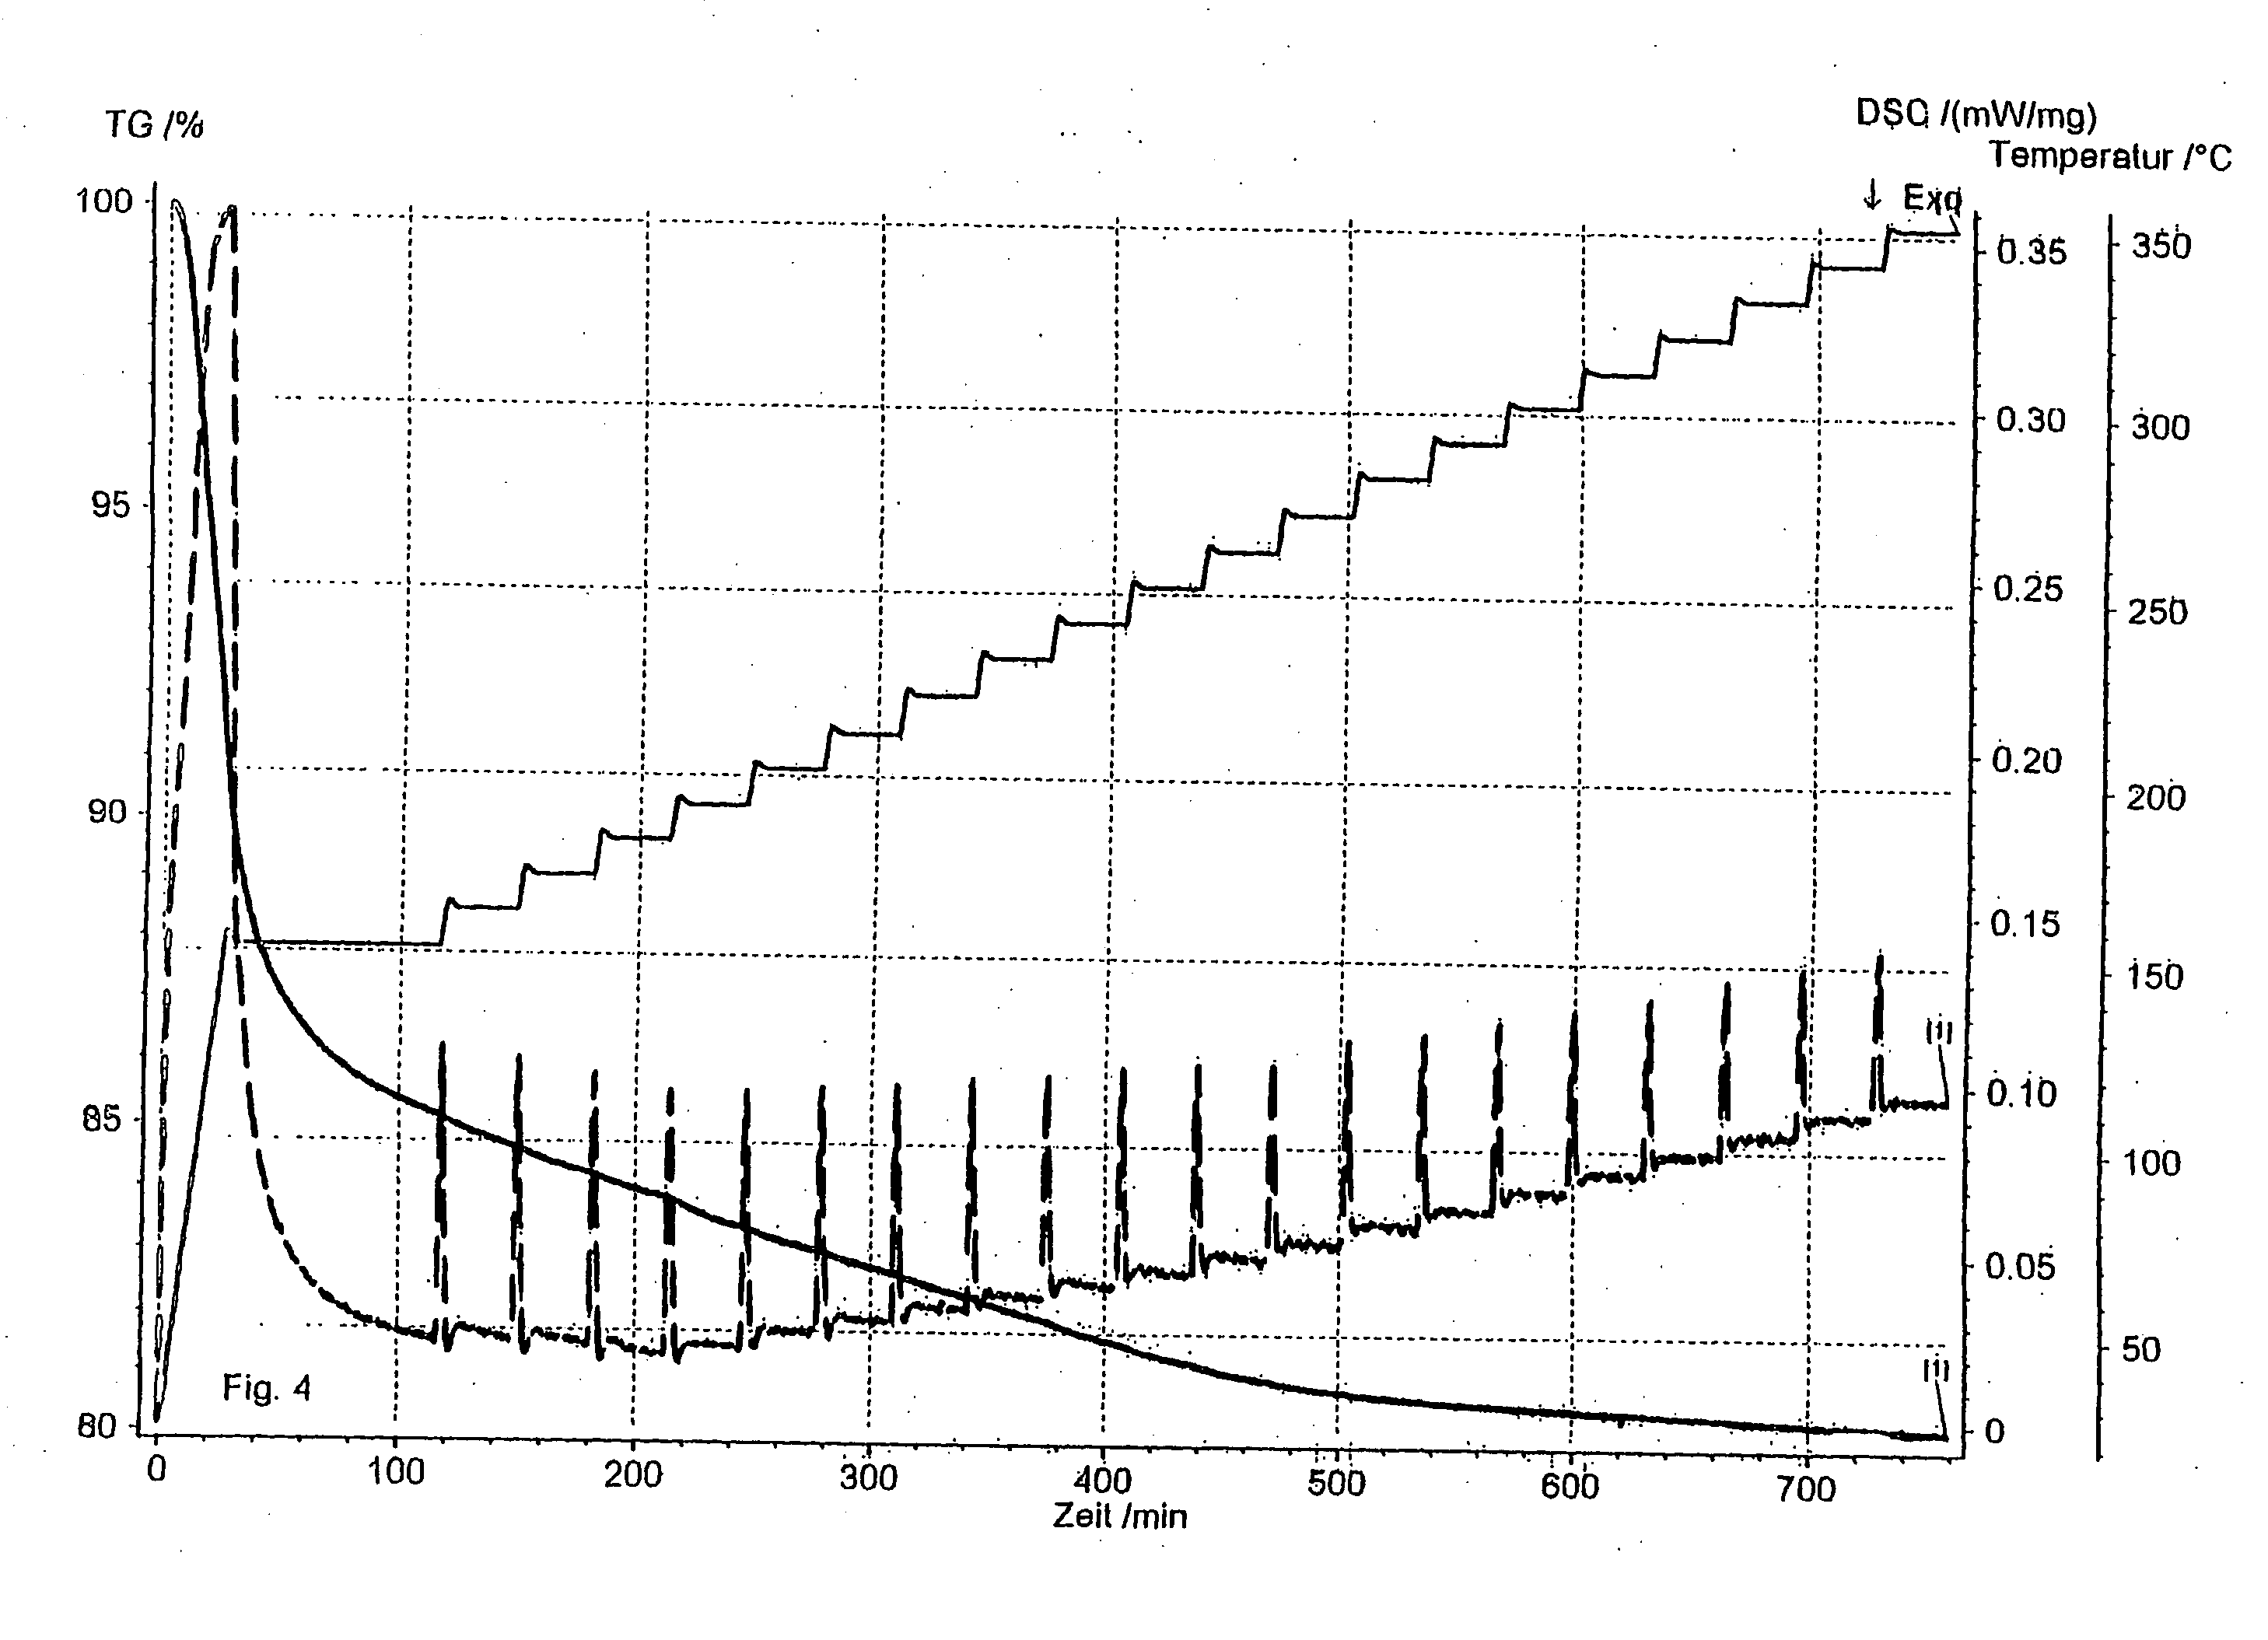 Method for sulfur compounds removal from contaminated gas and liquid streams